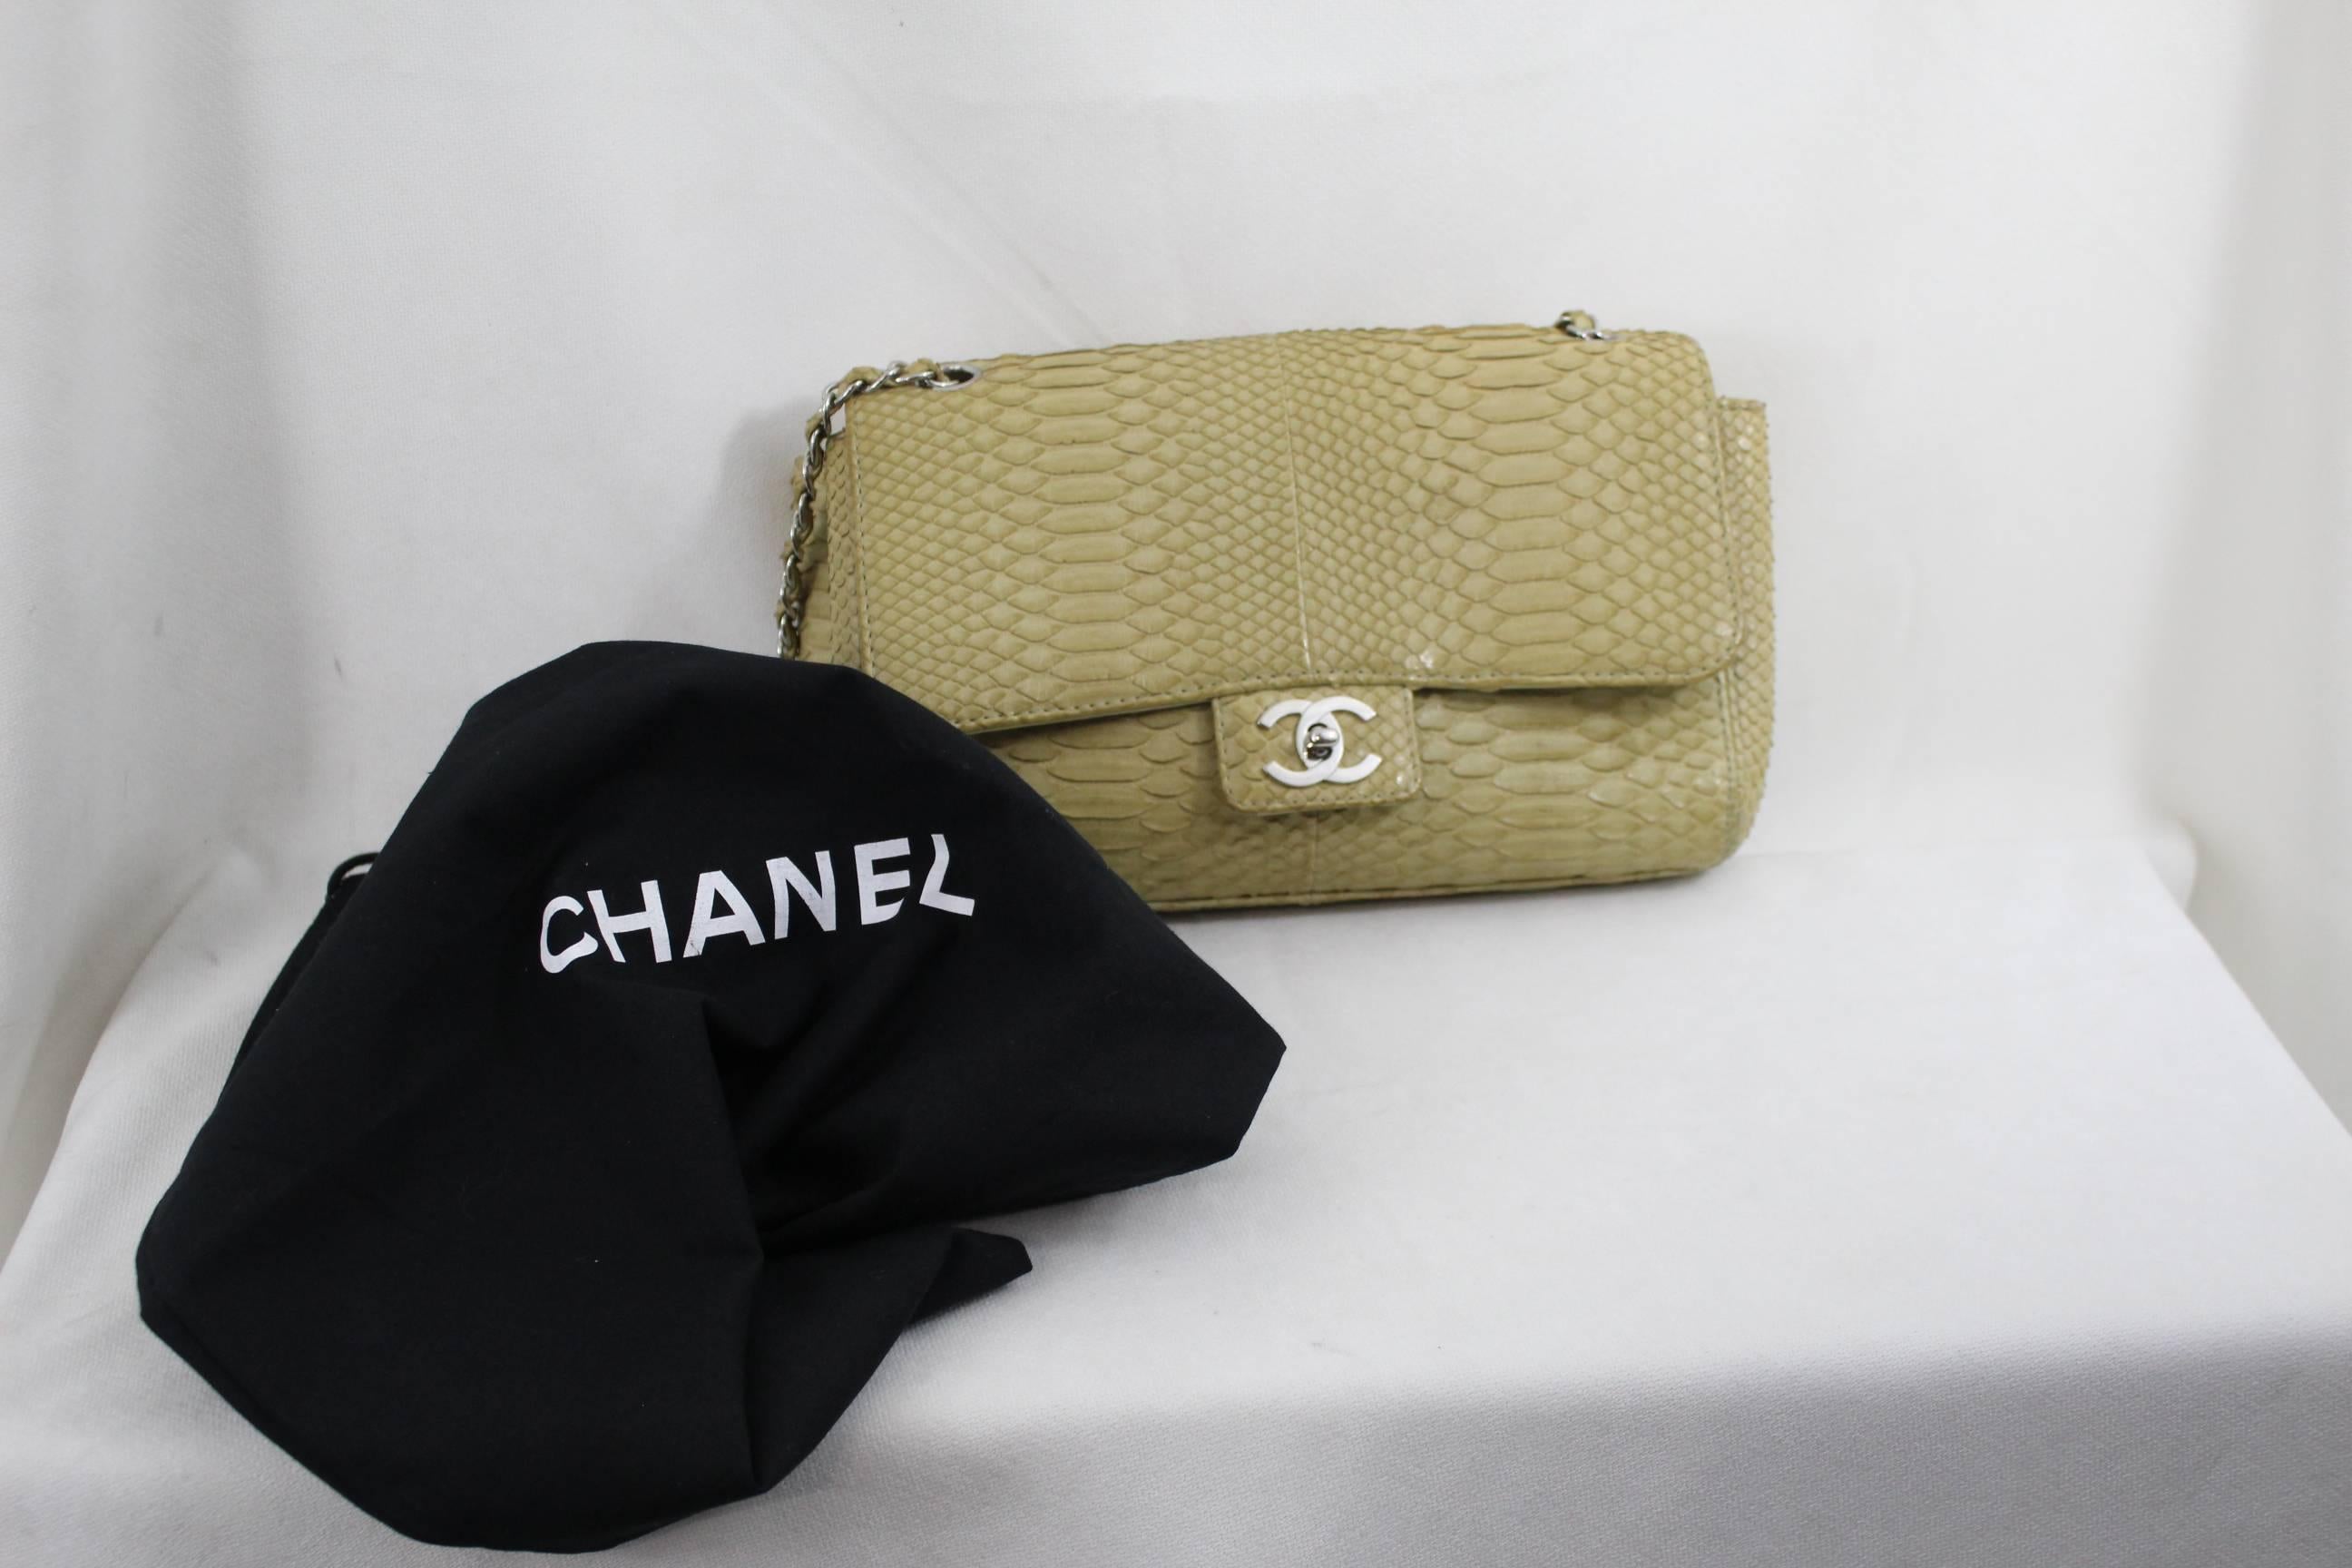 orgeous Chanel bag in exotic skin and stainless stell hardware.

Some small signs of use inside but excellent generla condition.

With dust bag.

Size 10x7 inches